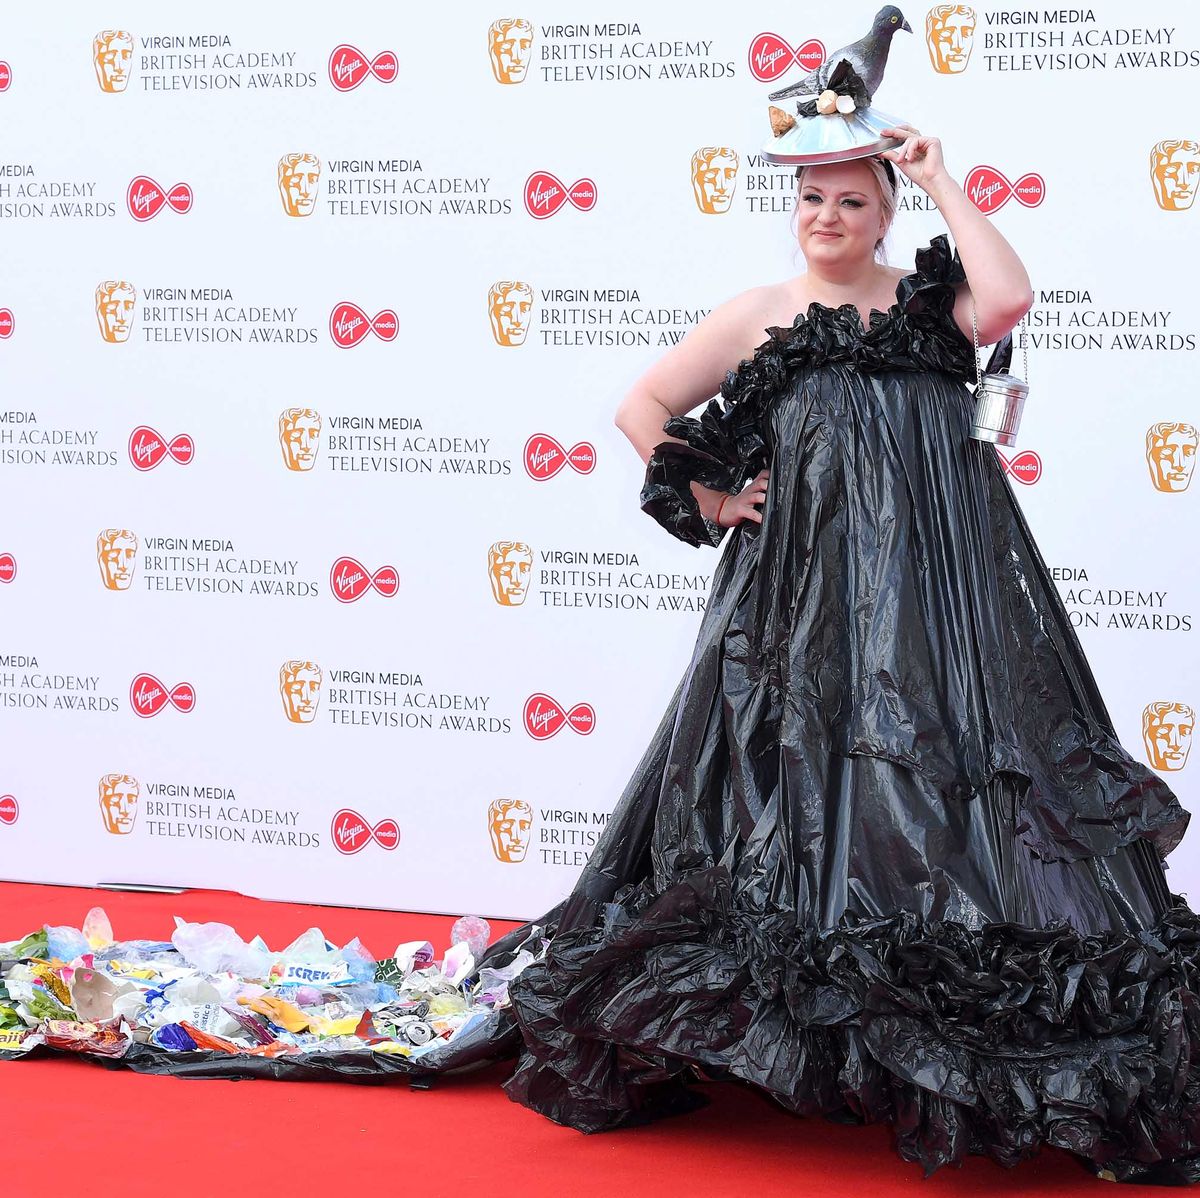 An actress wearing a dress made out of garbage bags, Academy